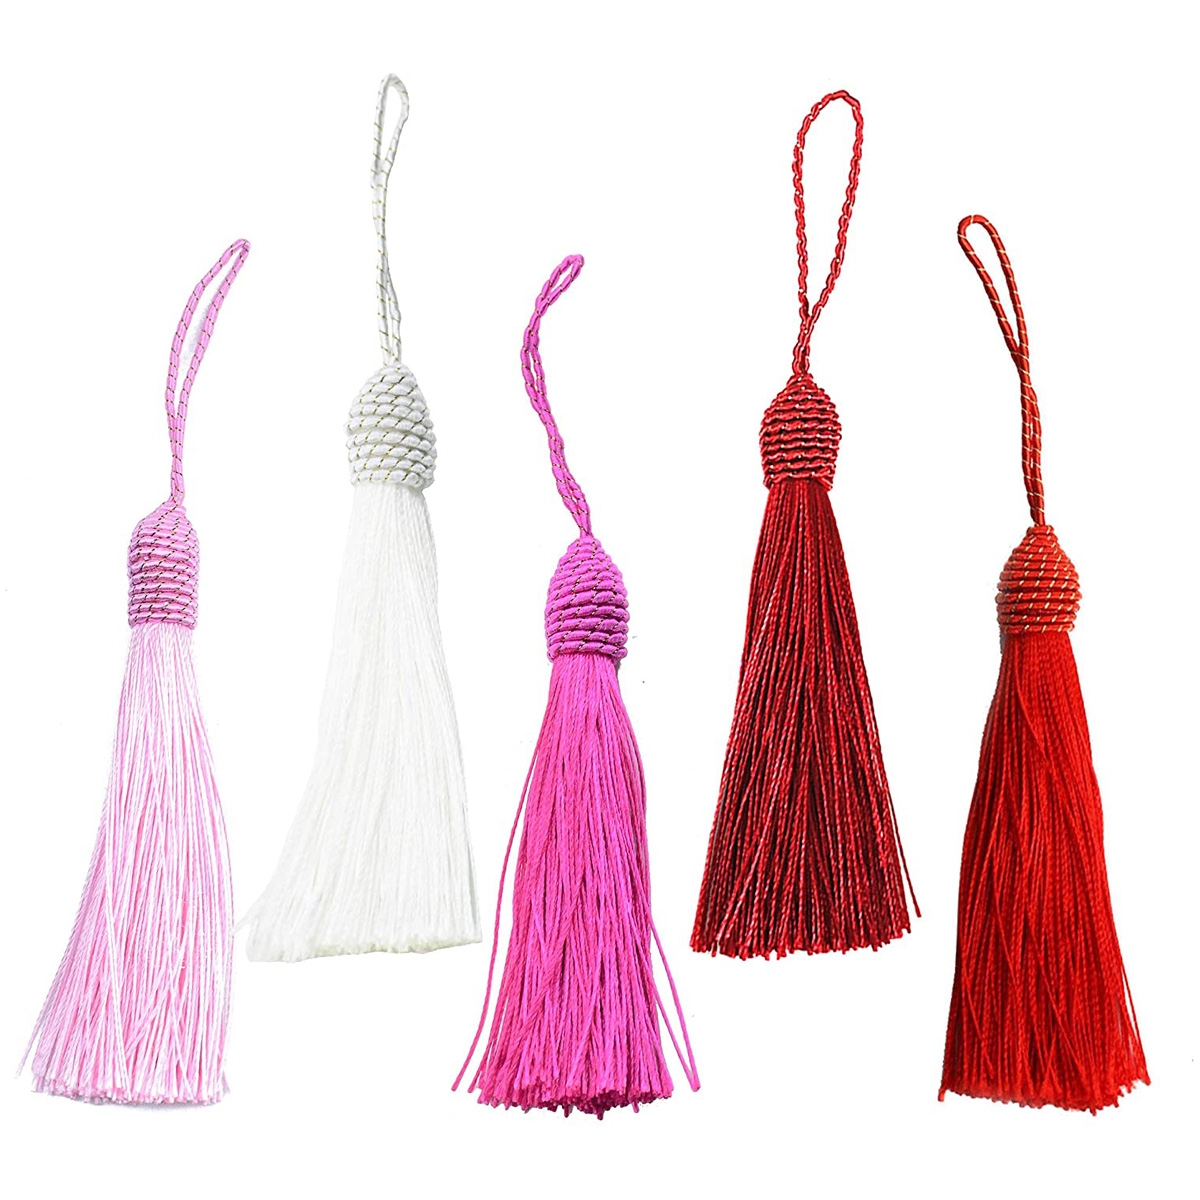 6 Inch Silky Floss Bookmark Tassels with 2-Inch Cord Loop and Small Chinese Knot  multi color